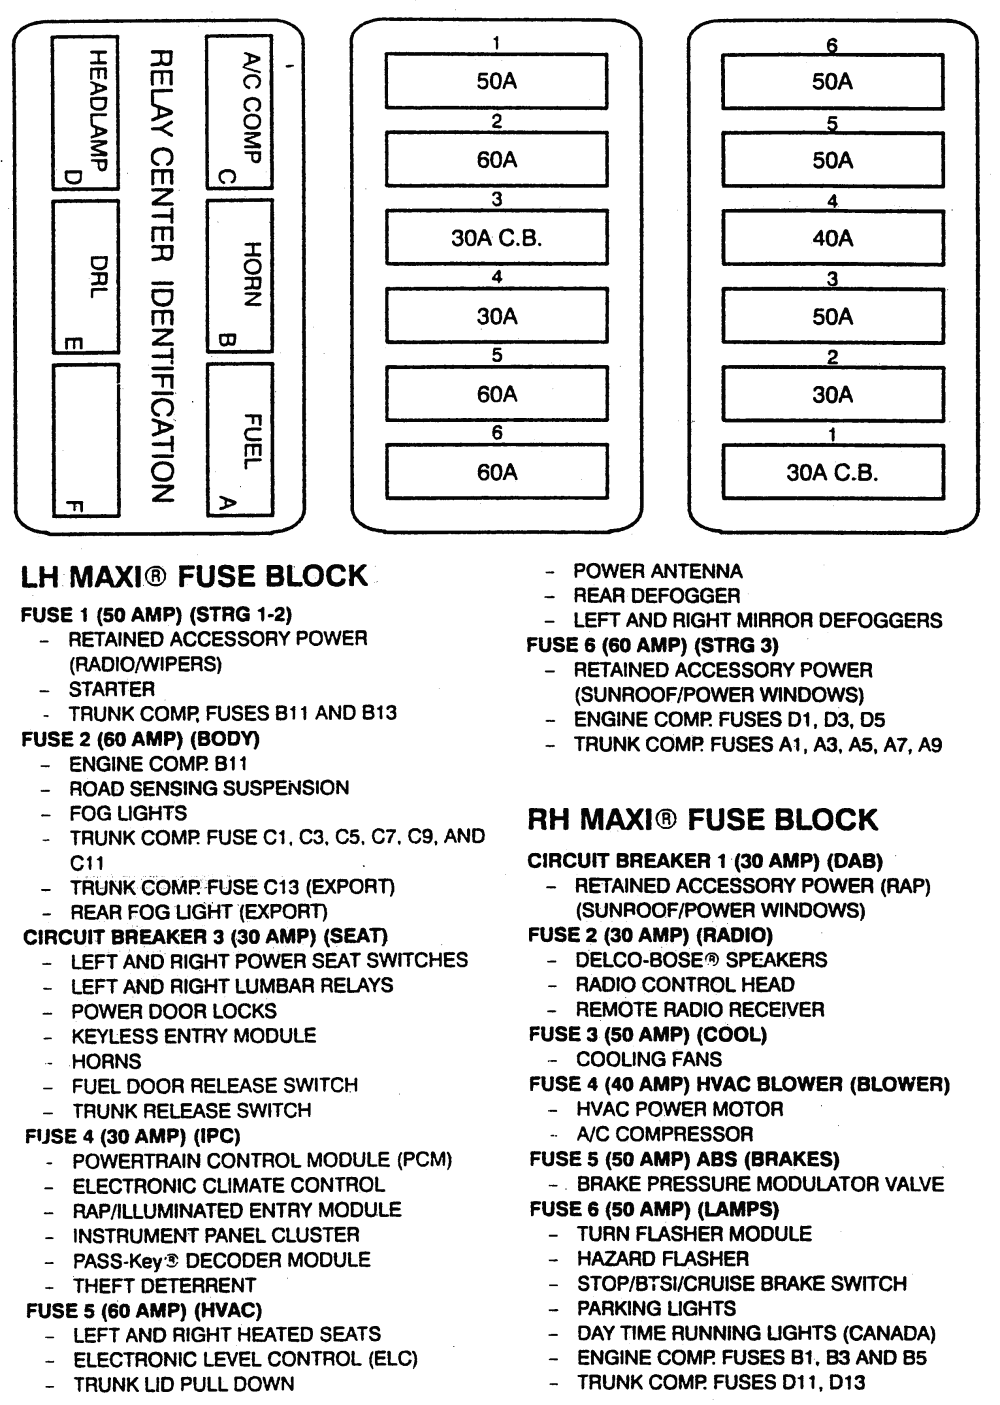 Fuse Box Wiring Diagram For 1998 Catera